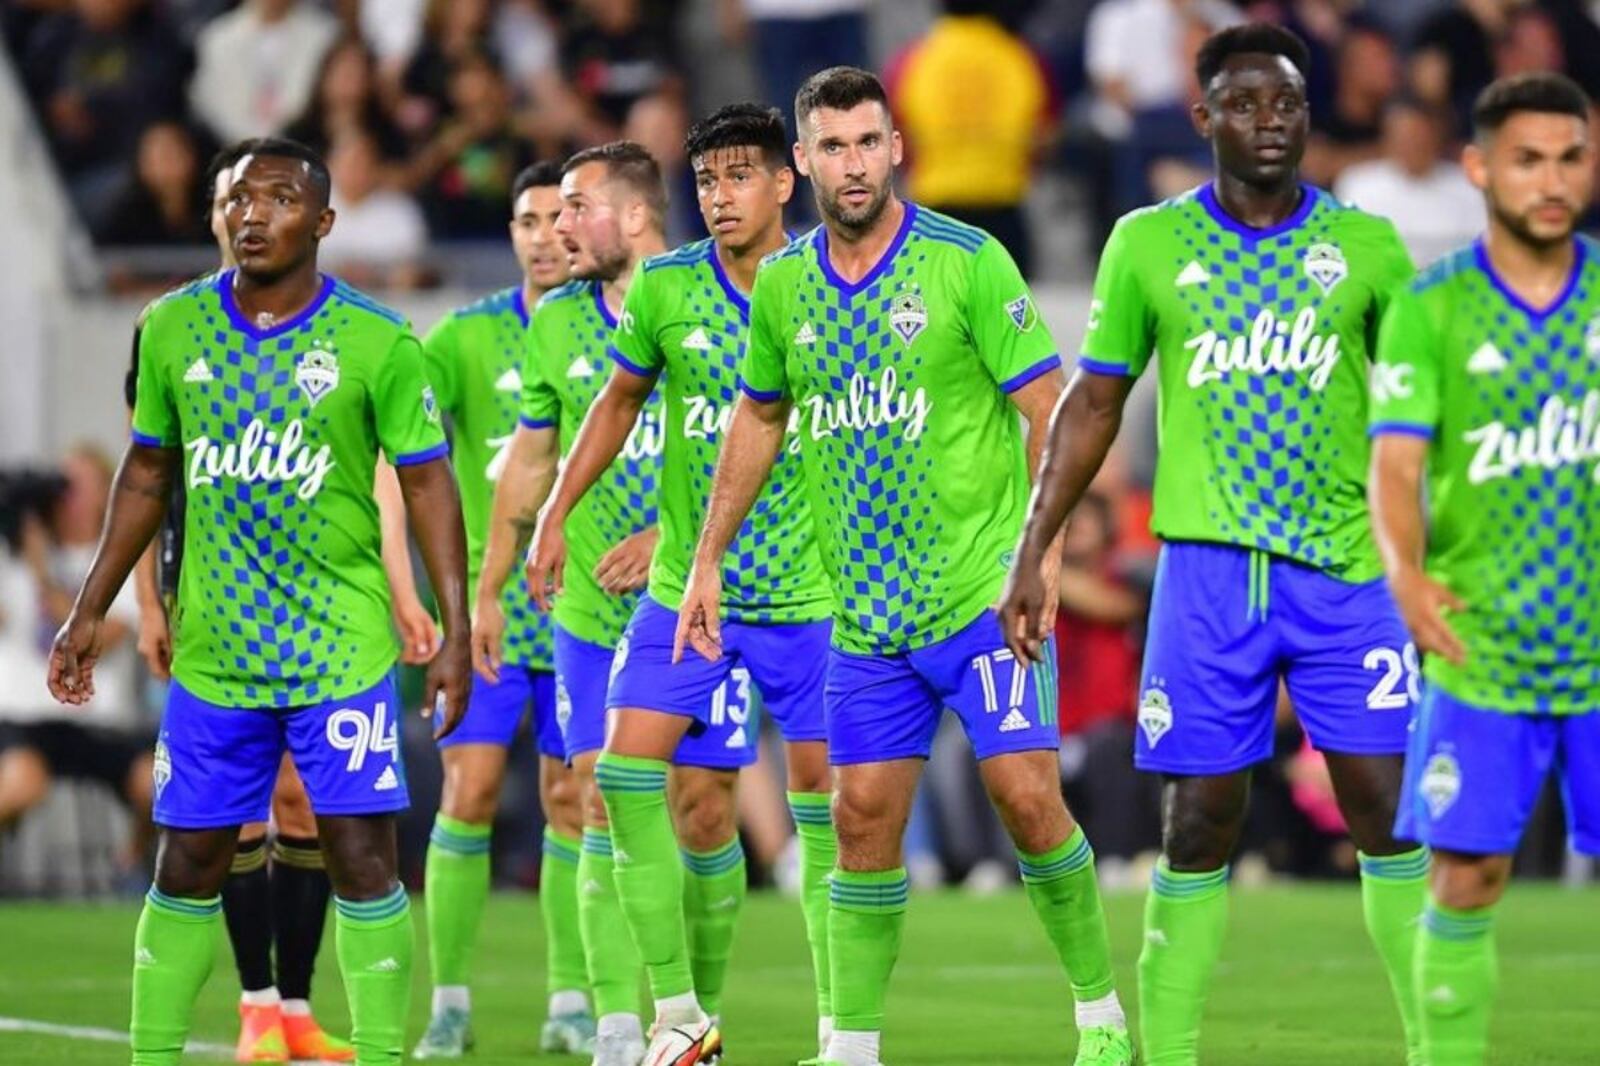 The hard failure of the Seattle Sounders in the MLS